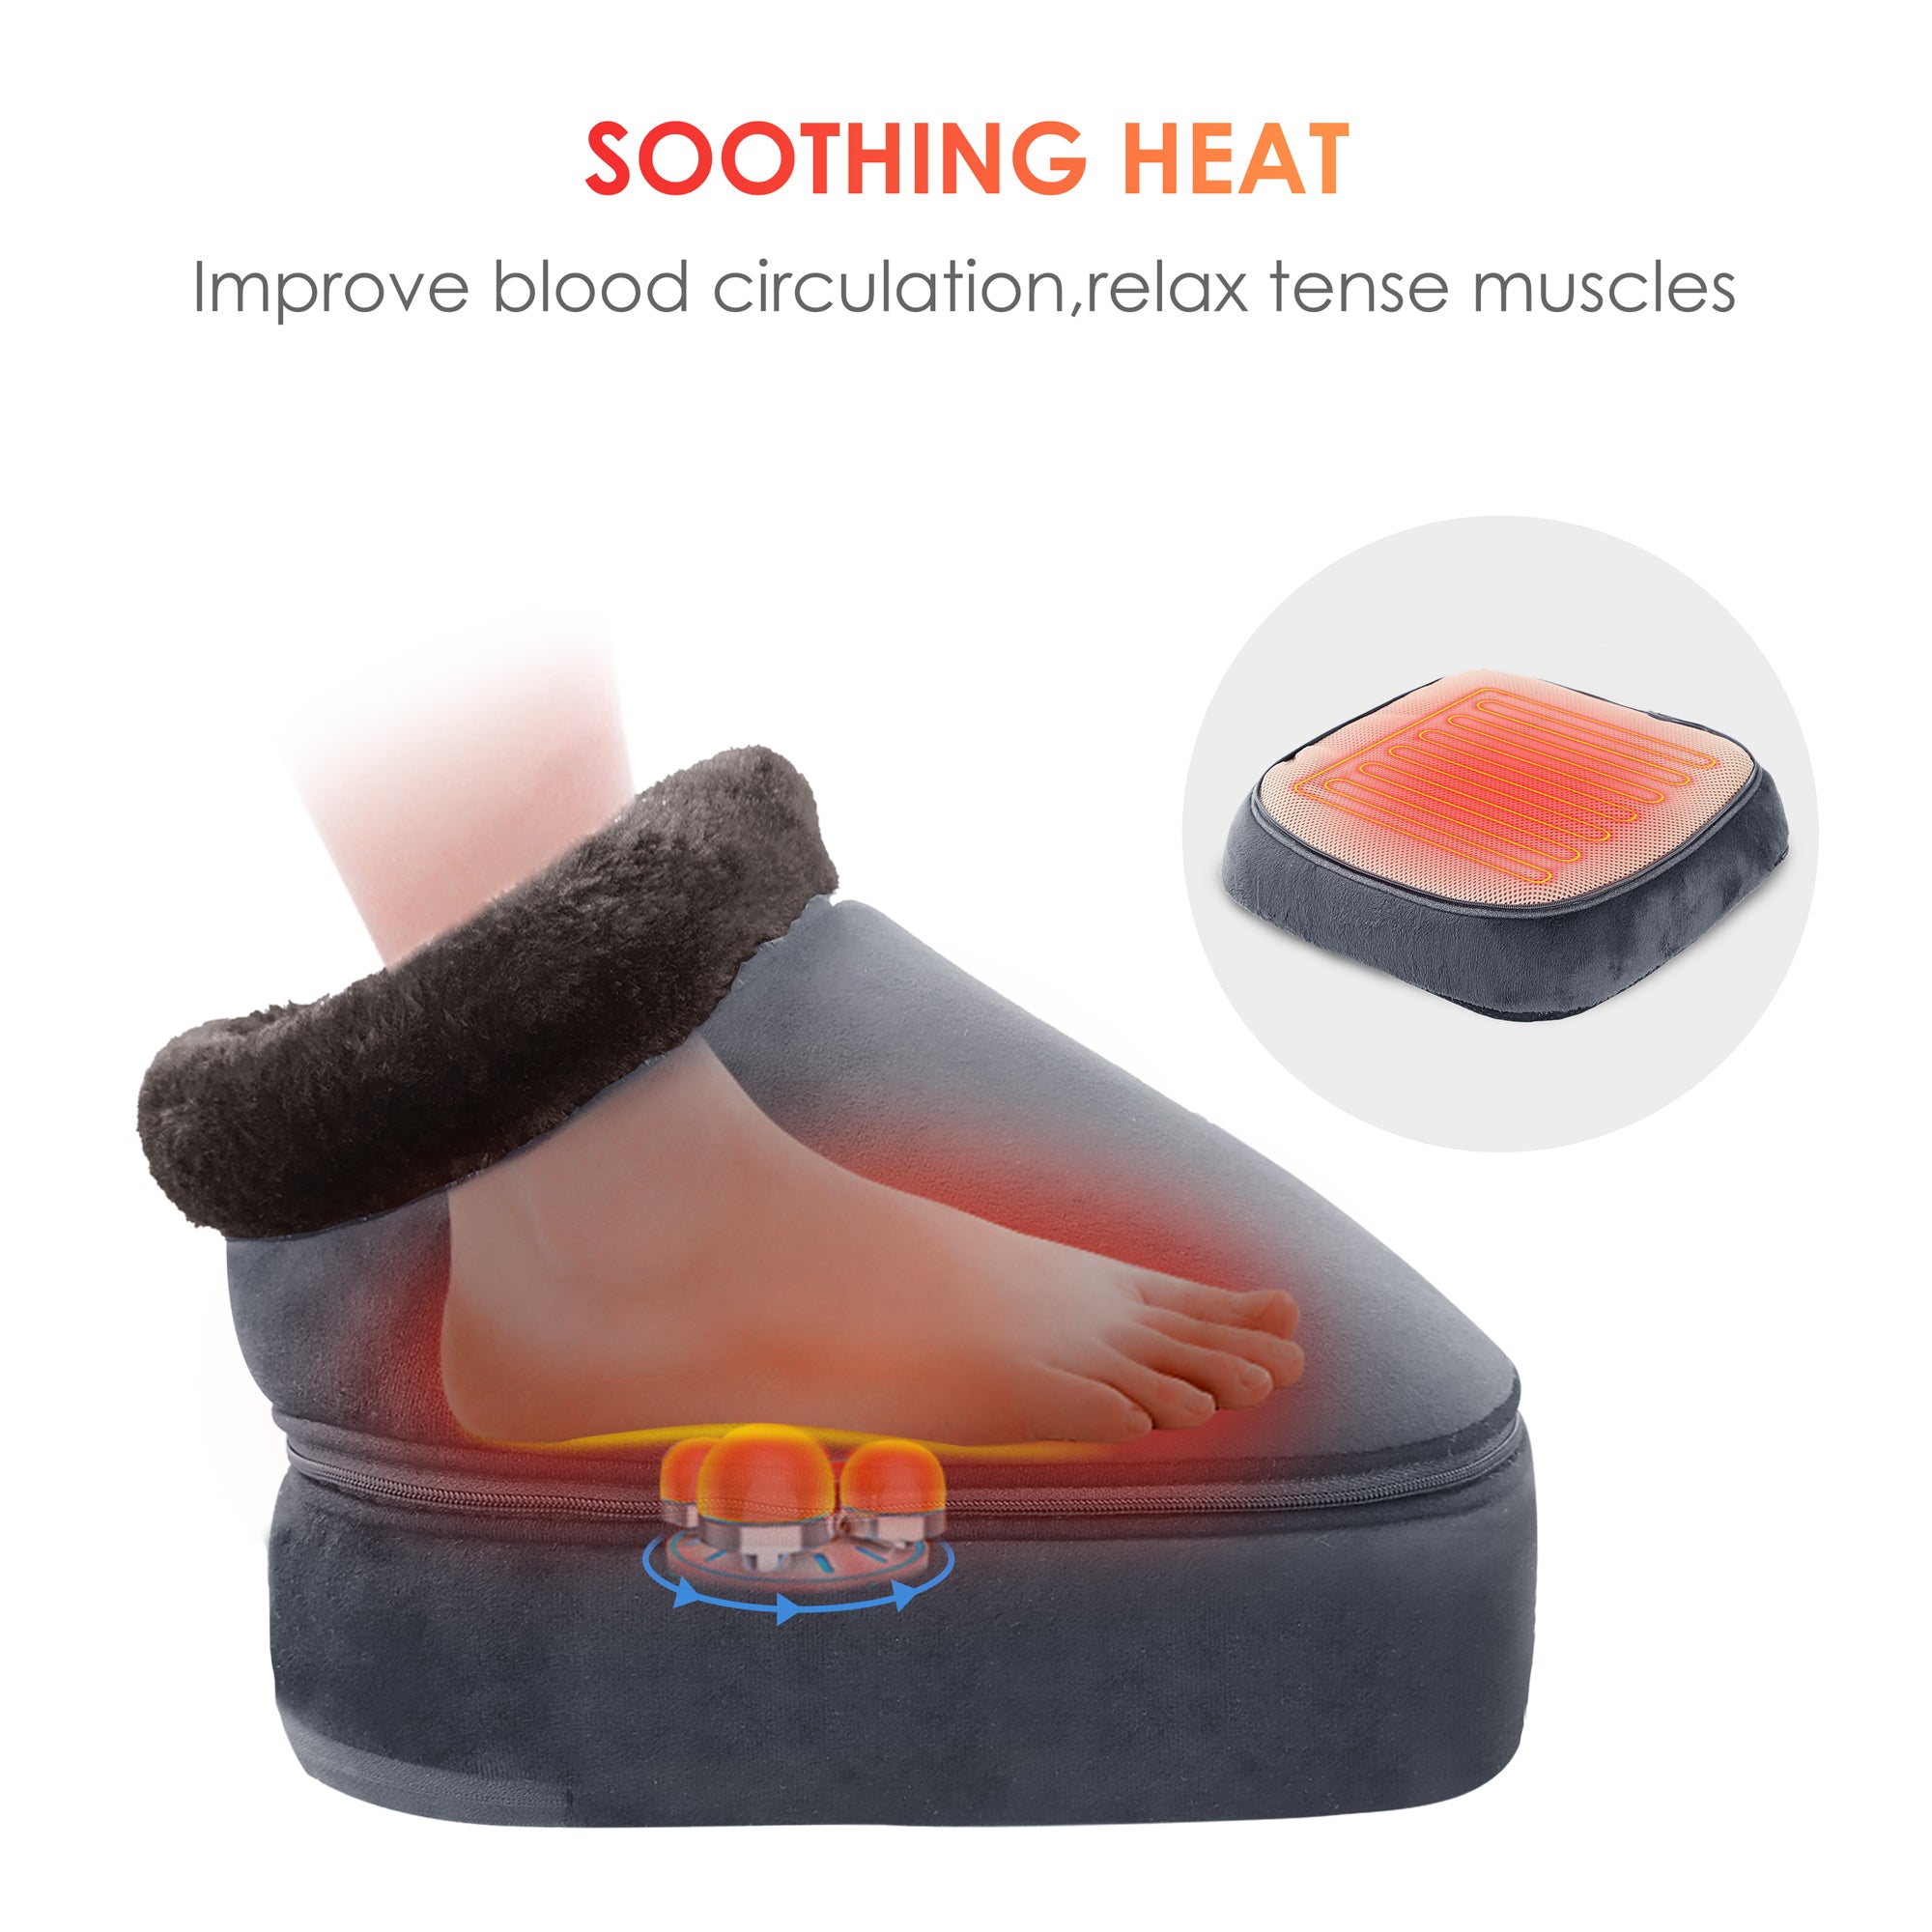 Comfier Shiatsu Foot Massager with Heat,Electric Heated Foot Warmer for Plantar Fasciitis,Neuropathy,Foot Stress Relief - 5202S